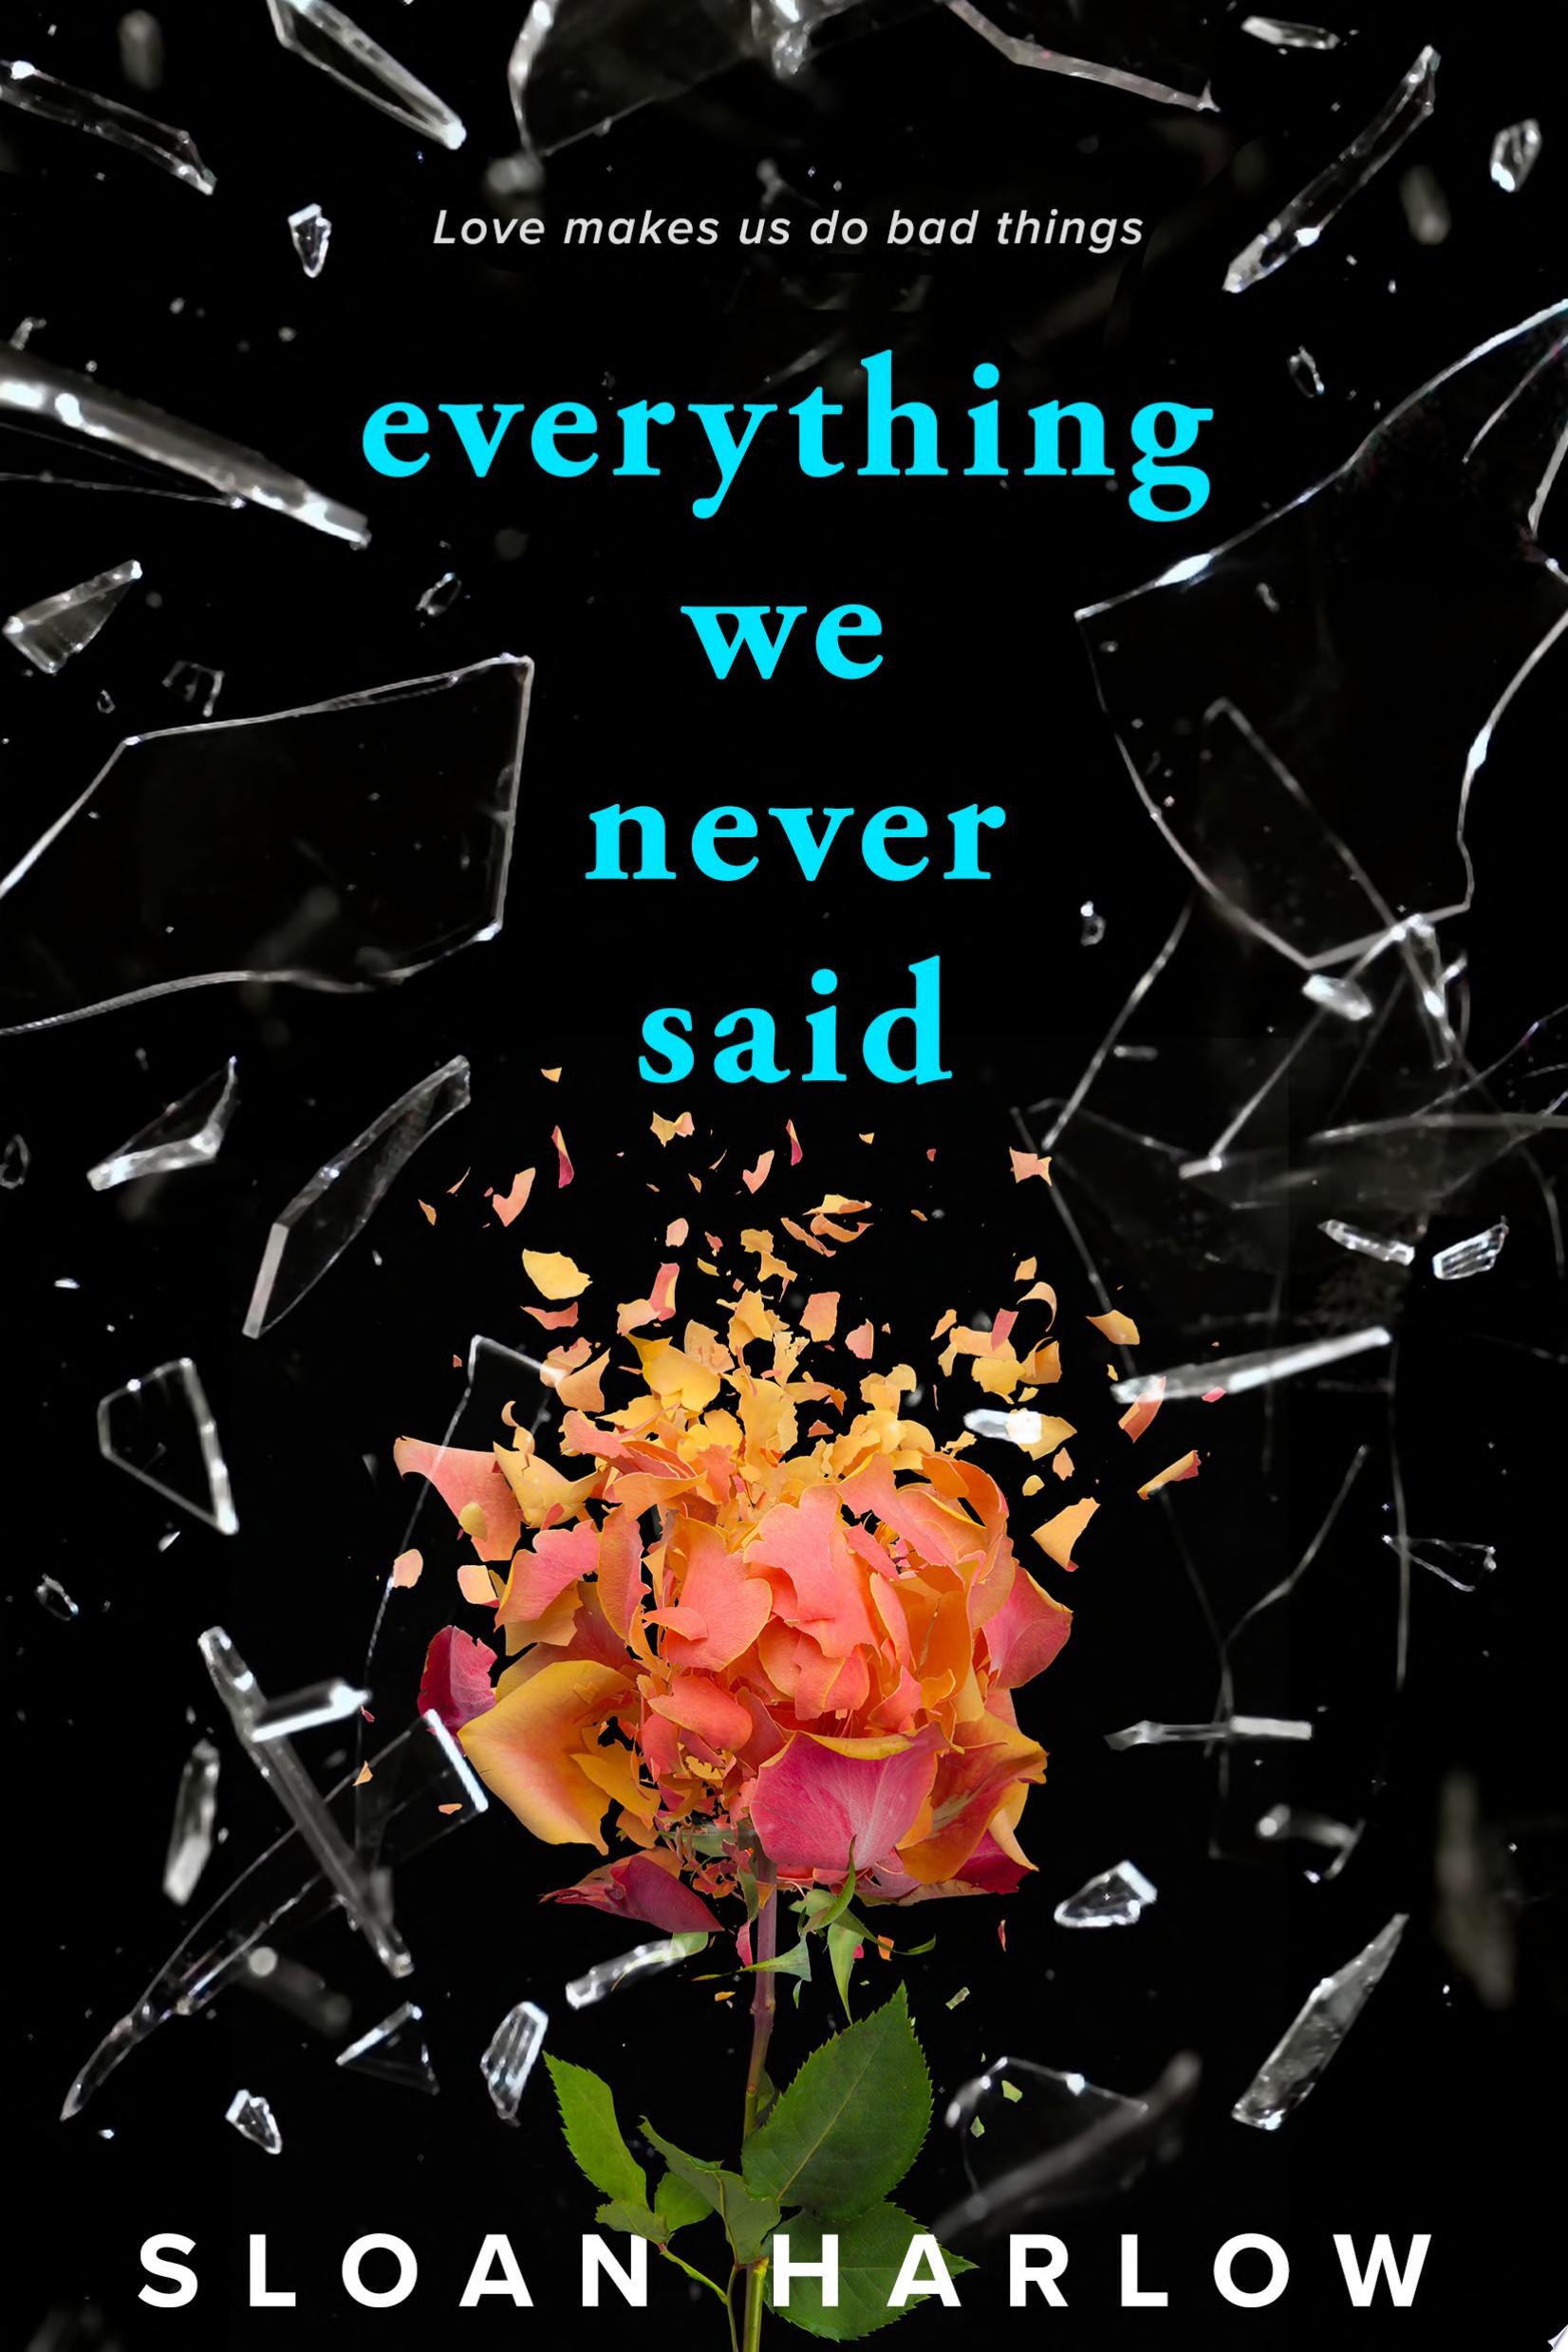 Image for "Everything We Never Said"